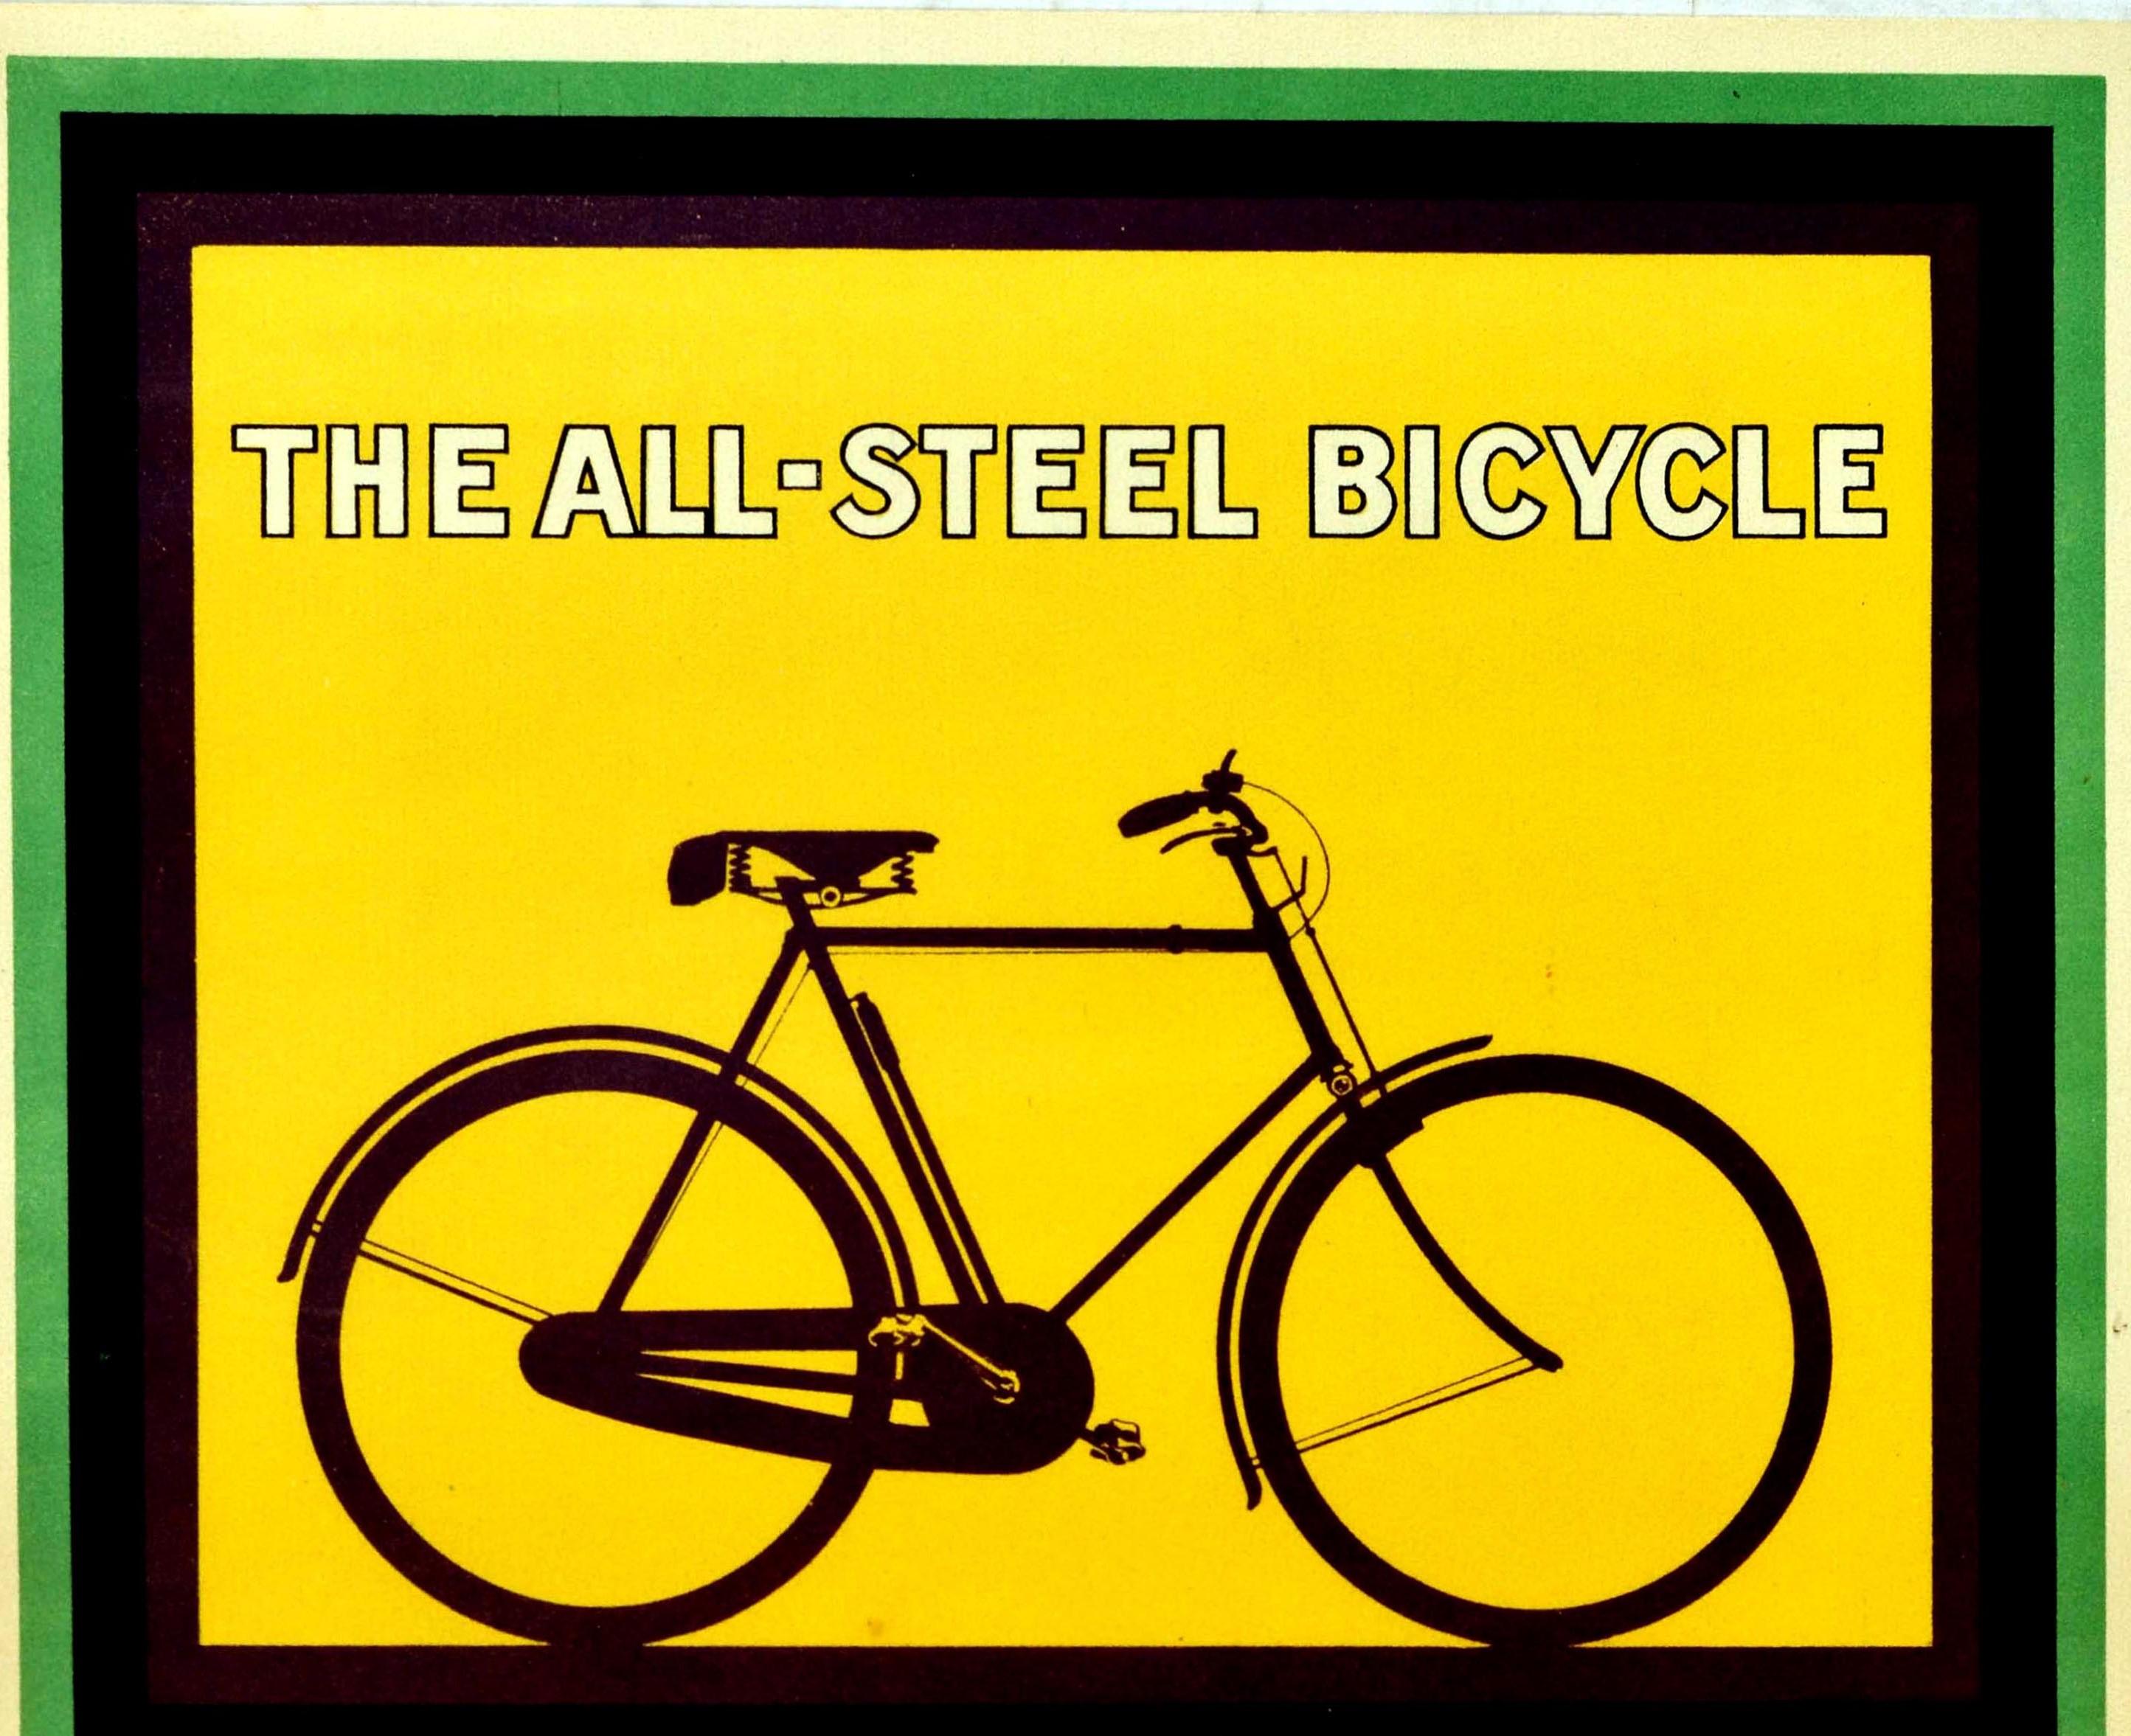 Original vintage advertising poster for The All Steel Bicycle The Raleigh With Everlasting Guarantee featuring a great design of a silhouette of a Raleigh bike on a yellow background with the bold stylized white lettering in the black and green